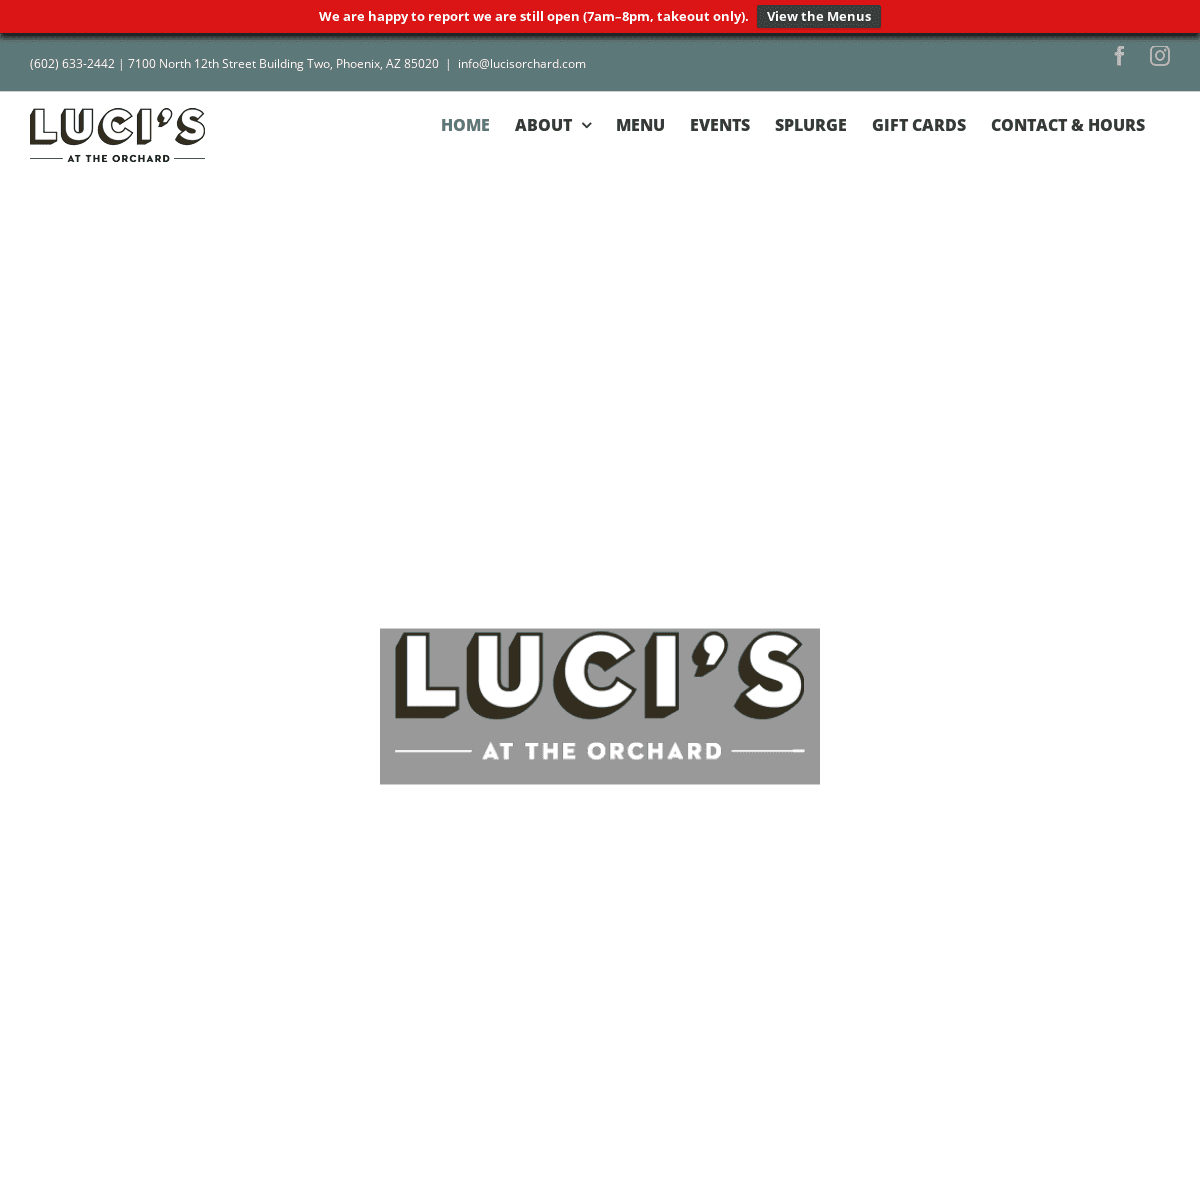 A complete backup of lucisorchard.com